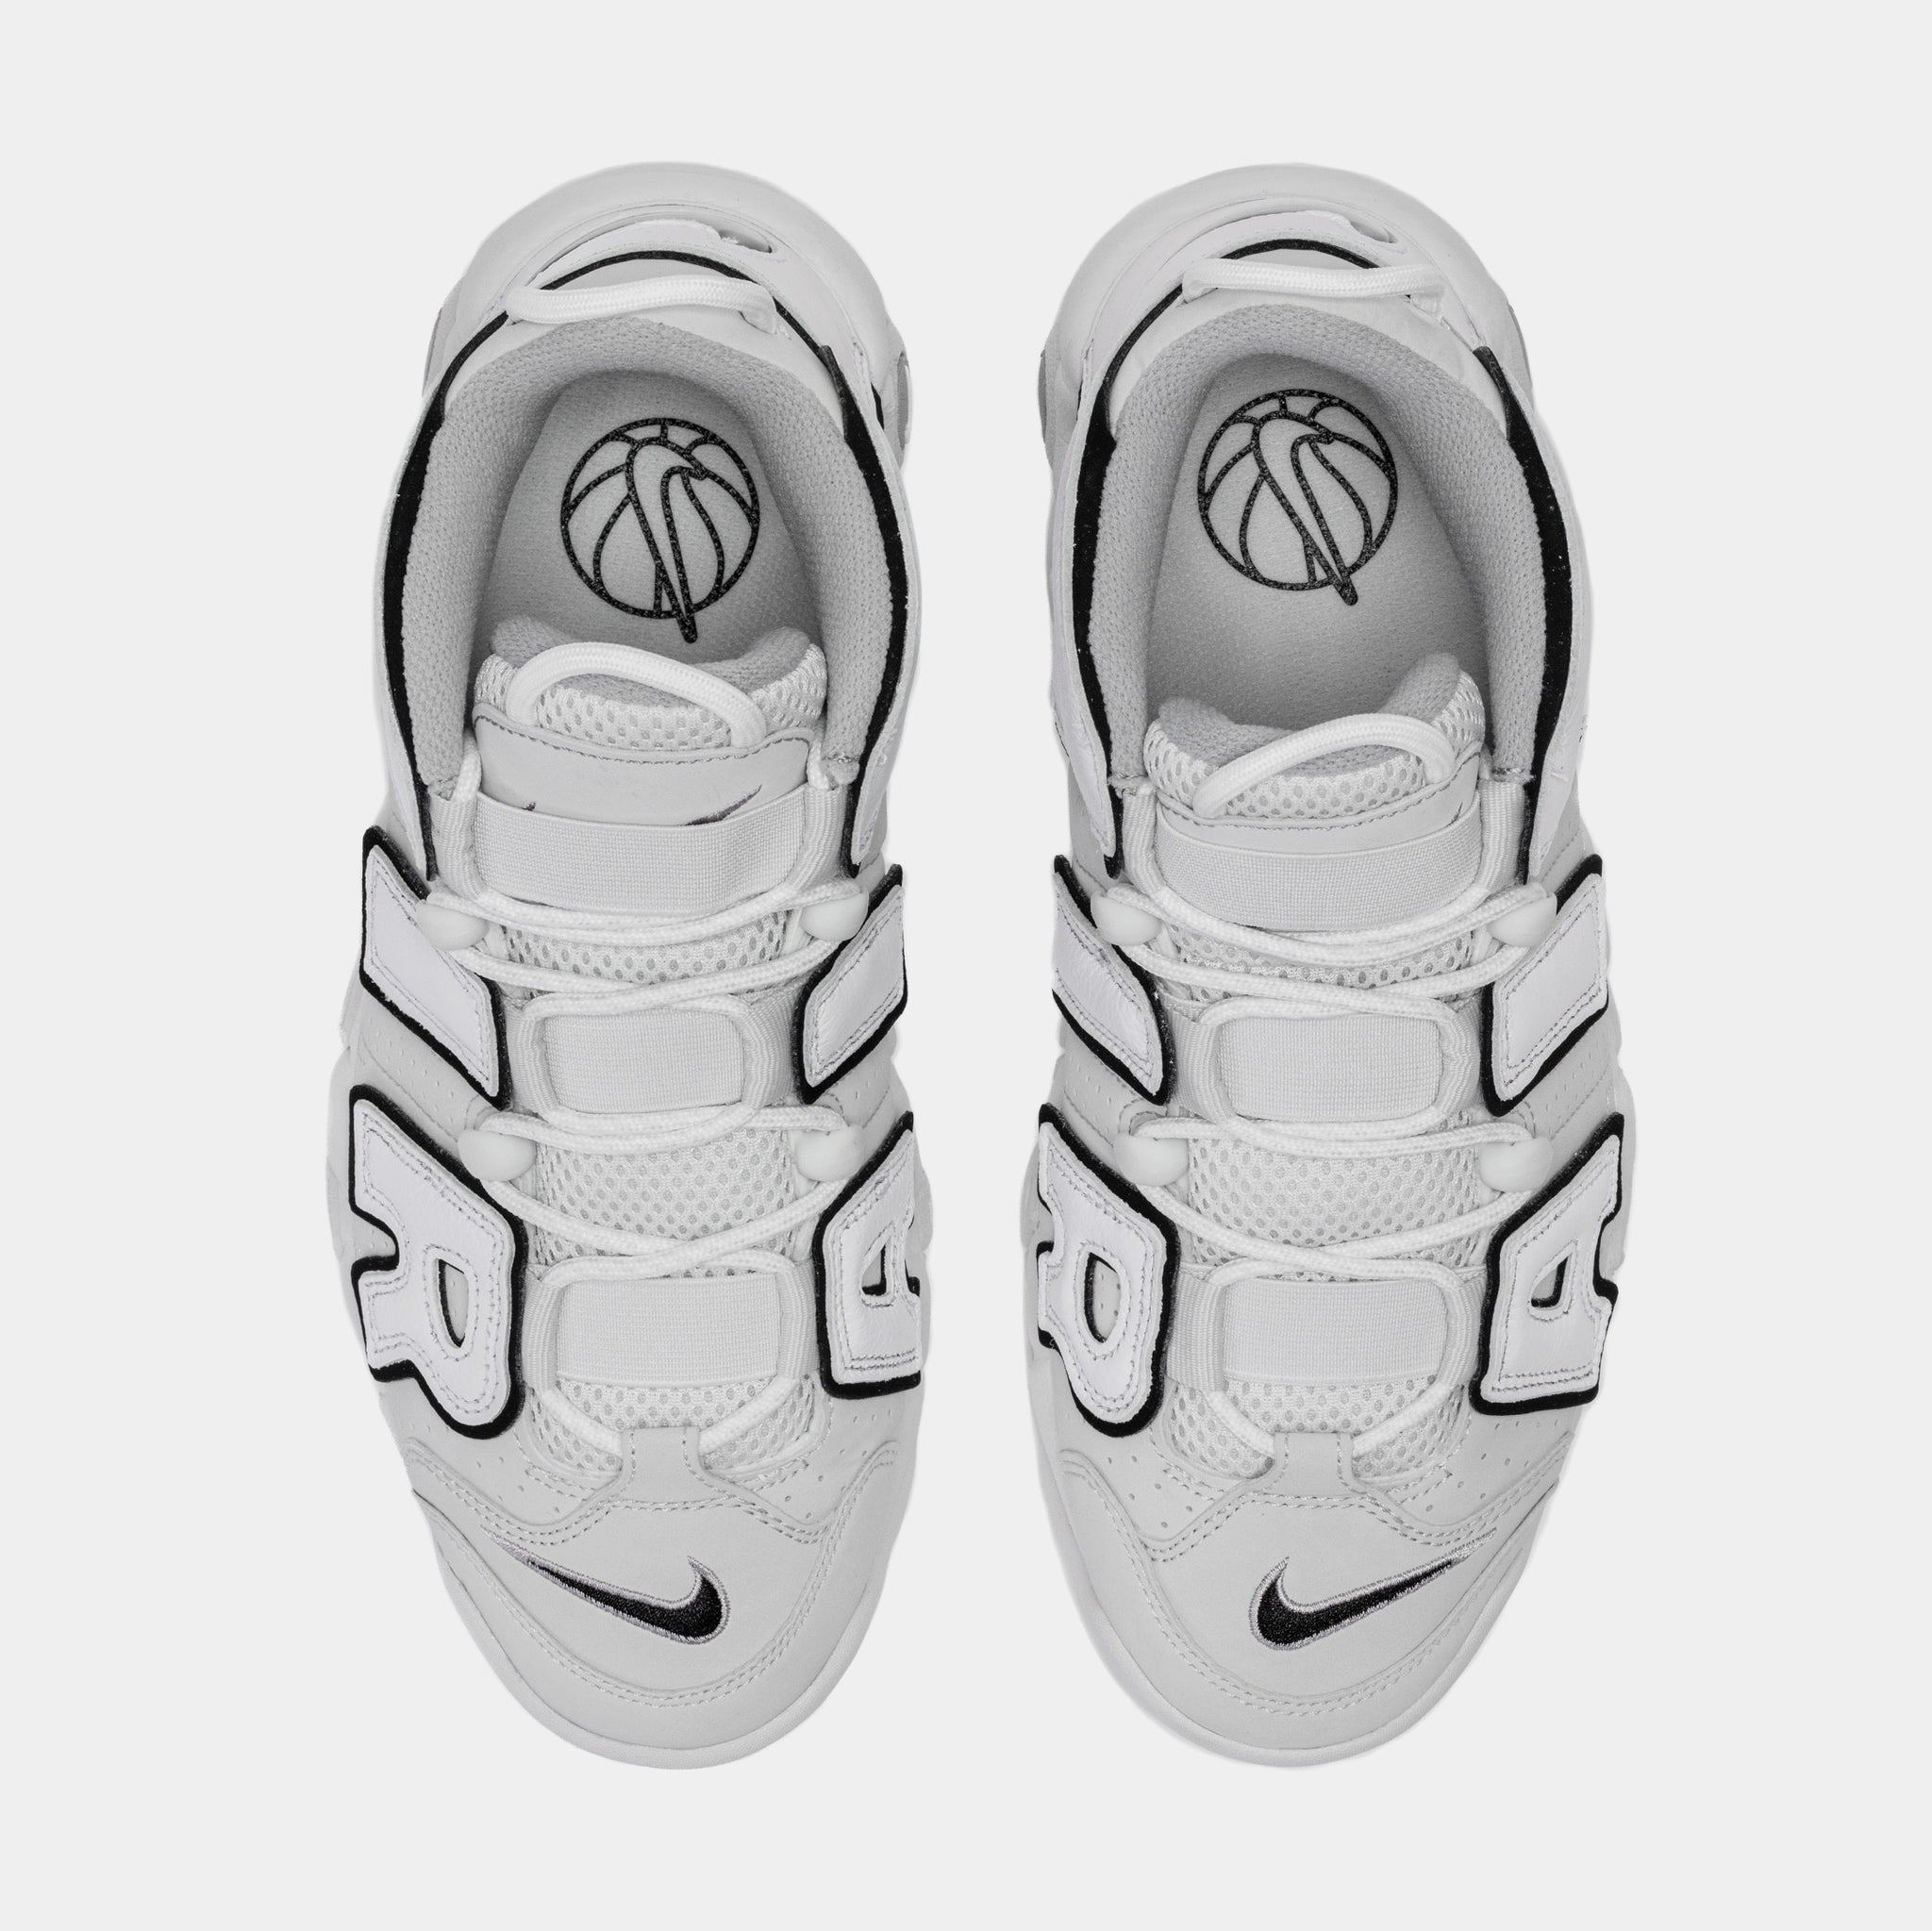 Nike Air More Uptempo Photon Dust Mens Lifestyle Shoes White Grey 